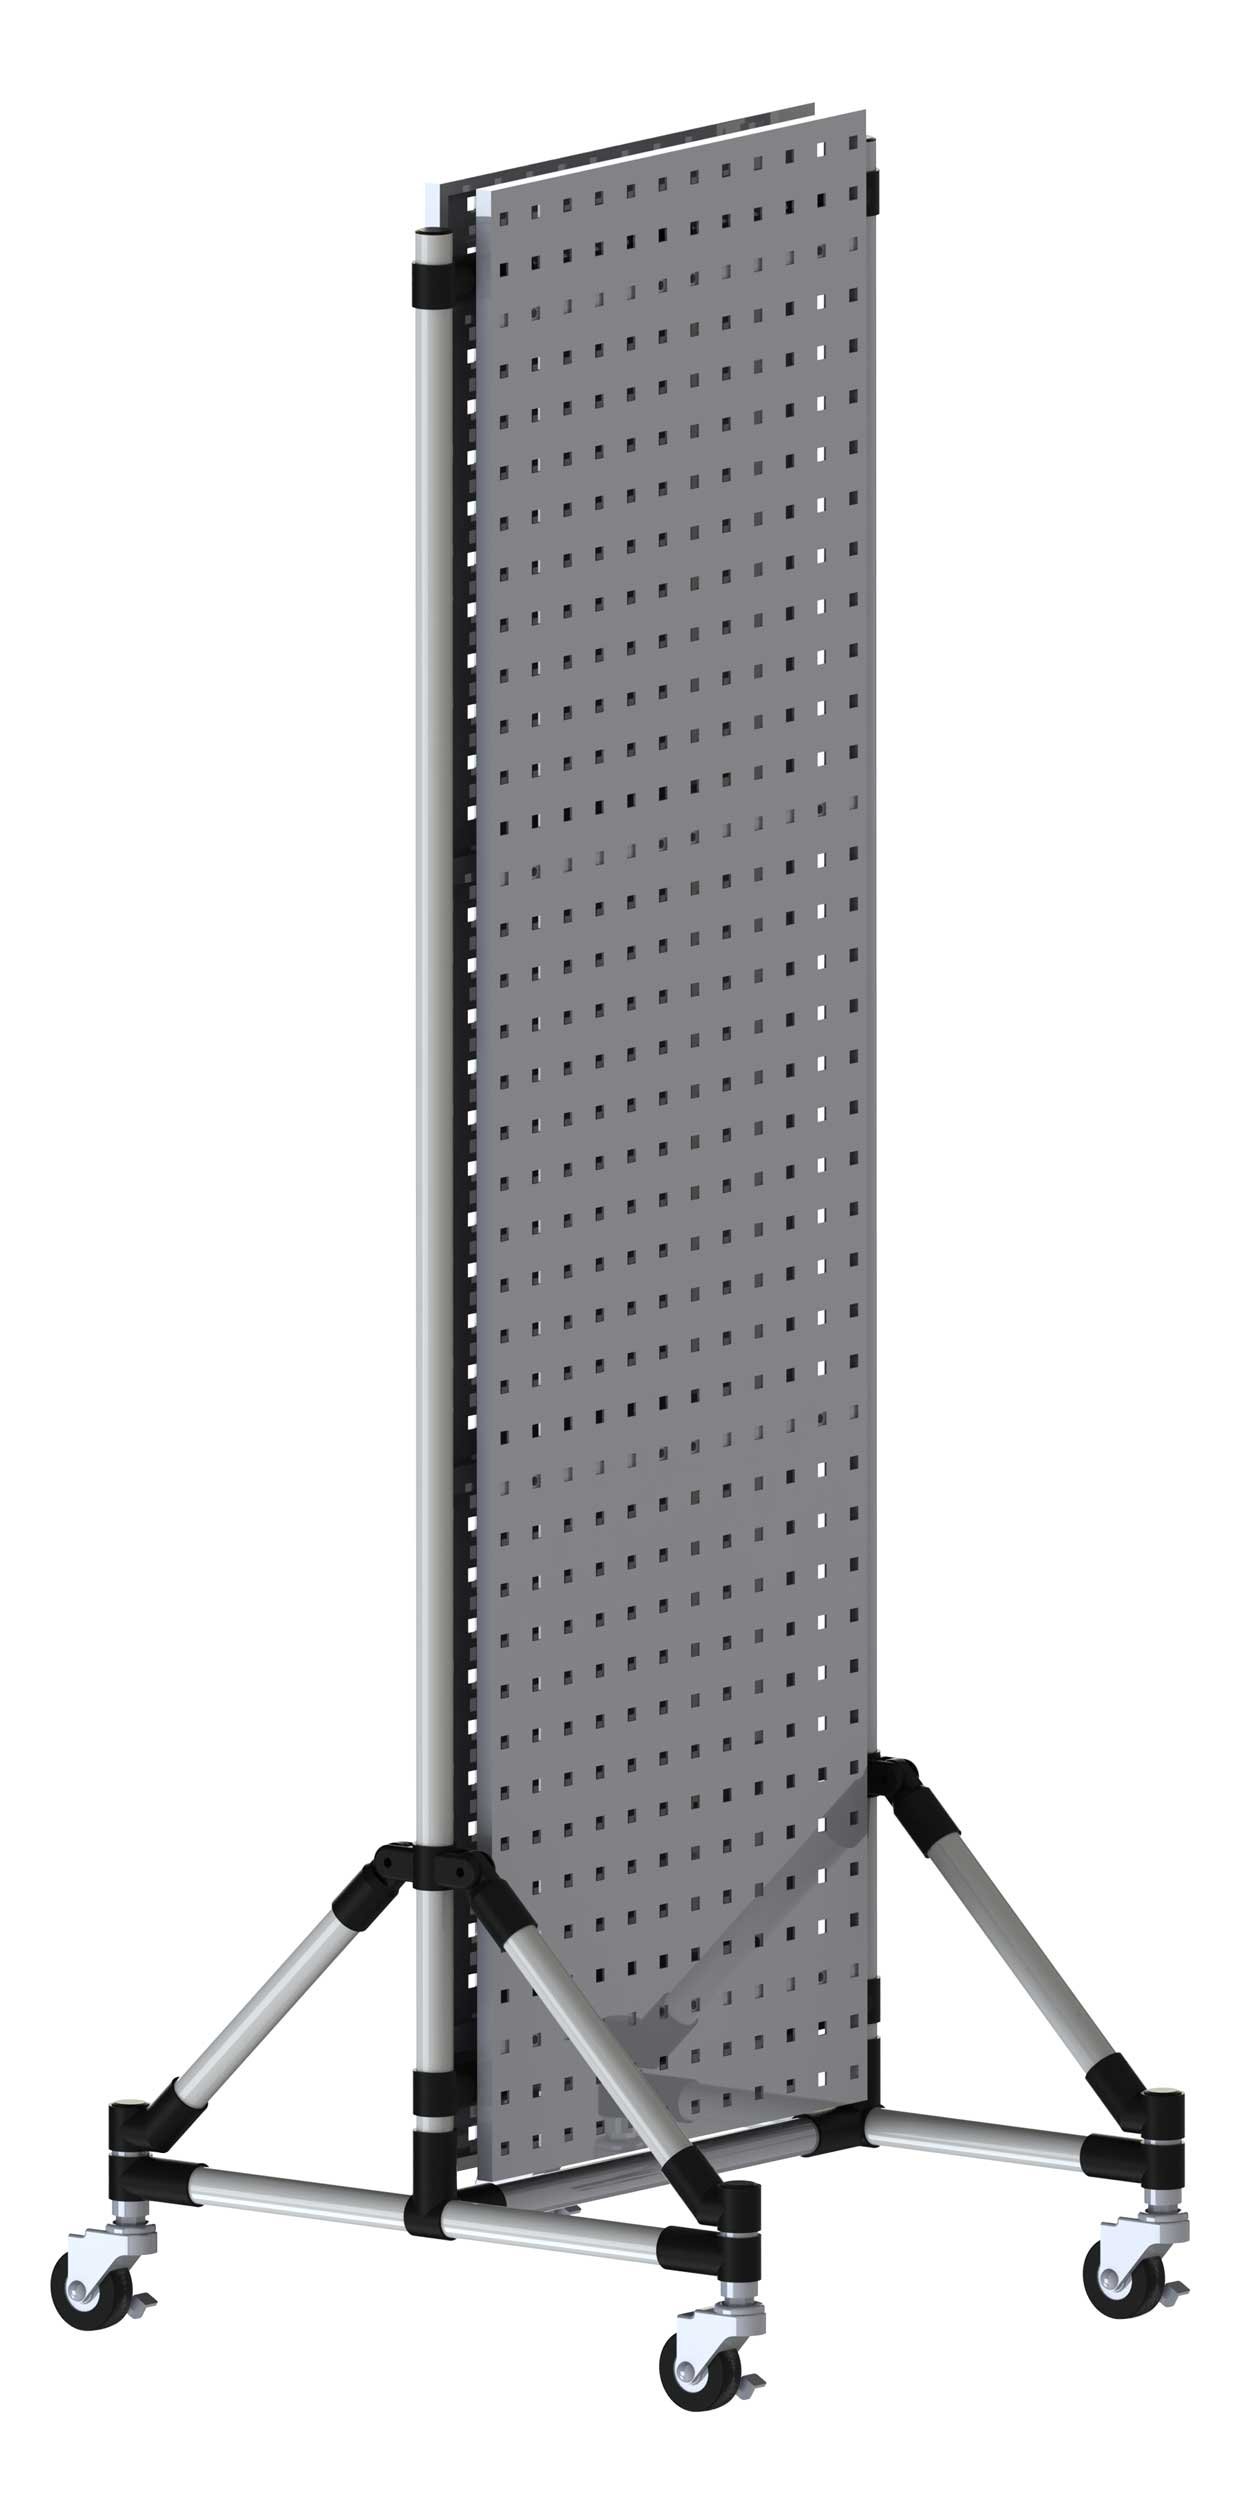 Shadowboard trolley with perforated panels